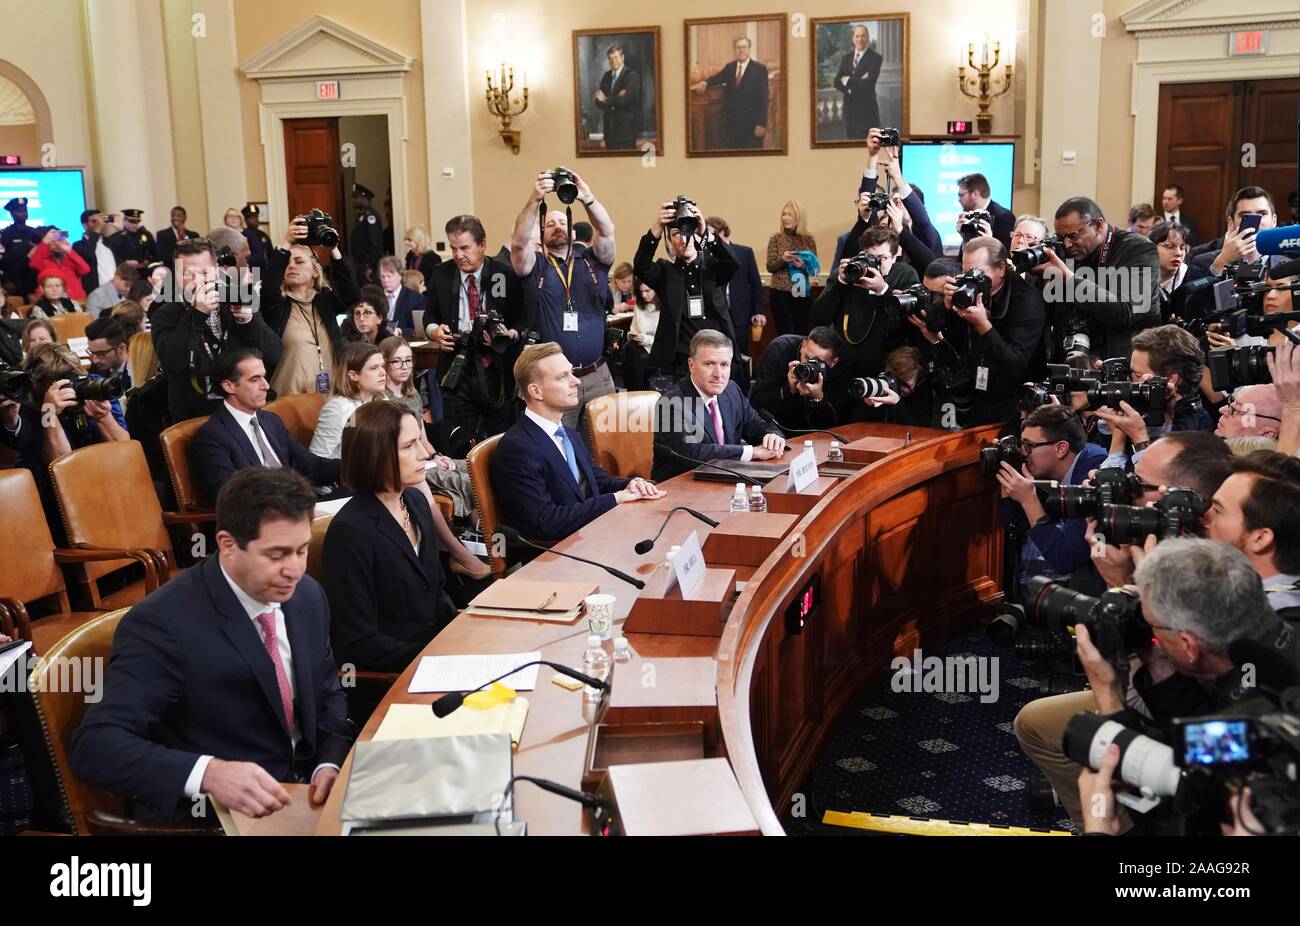 (191122) -- WASHINGTON, Nov. 22, 2019 (Xinhua) -- Fiona Hill (2nd L in the front row), former National Security Council senior director for Europe and Russia, and David Holmes (3rd L in the front row), a staffer from the U.S. Embassy in Ukraine, wait to testify before the U.S. House Intelligence Committee on Capitol Hill in Washington, DC, the United States, on Nov. 21, 2019. The last two witnesses scheduled for publicly testifying before a House panel as part of an impeachment inquiry into U.S. President Donald Trump offered their narratives of events relating to the investigation on Thursda Stock Photo